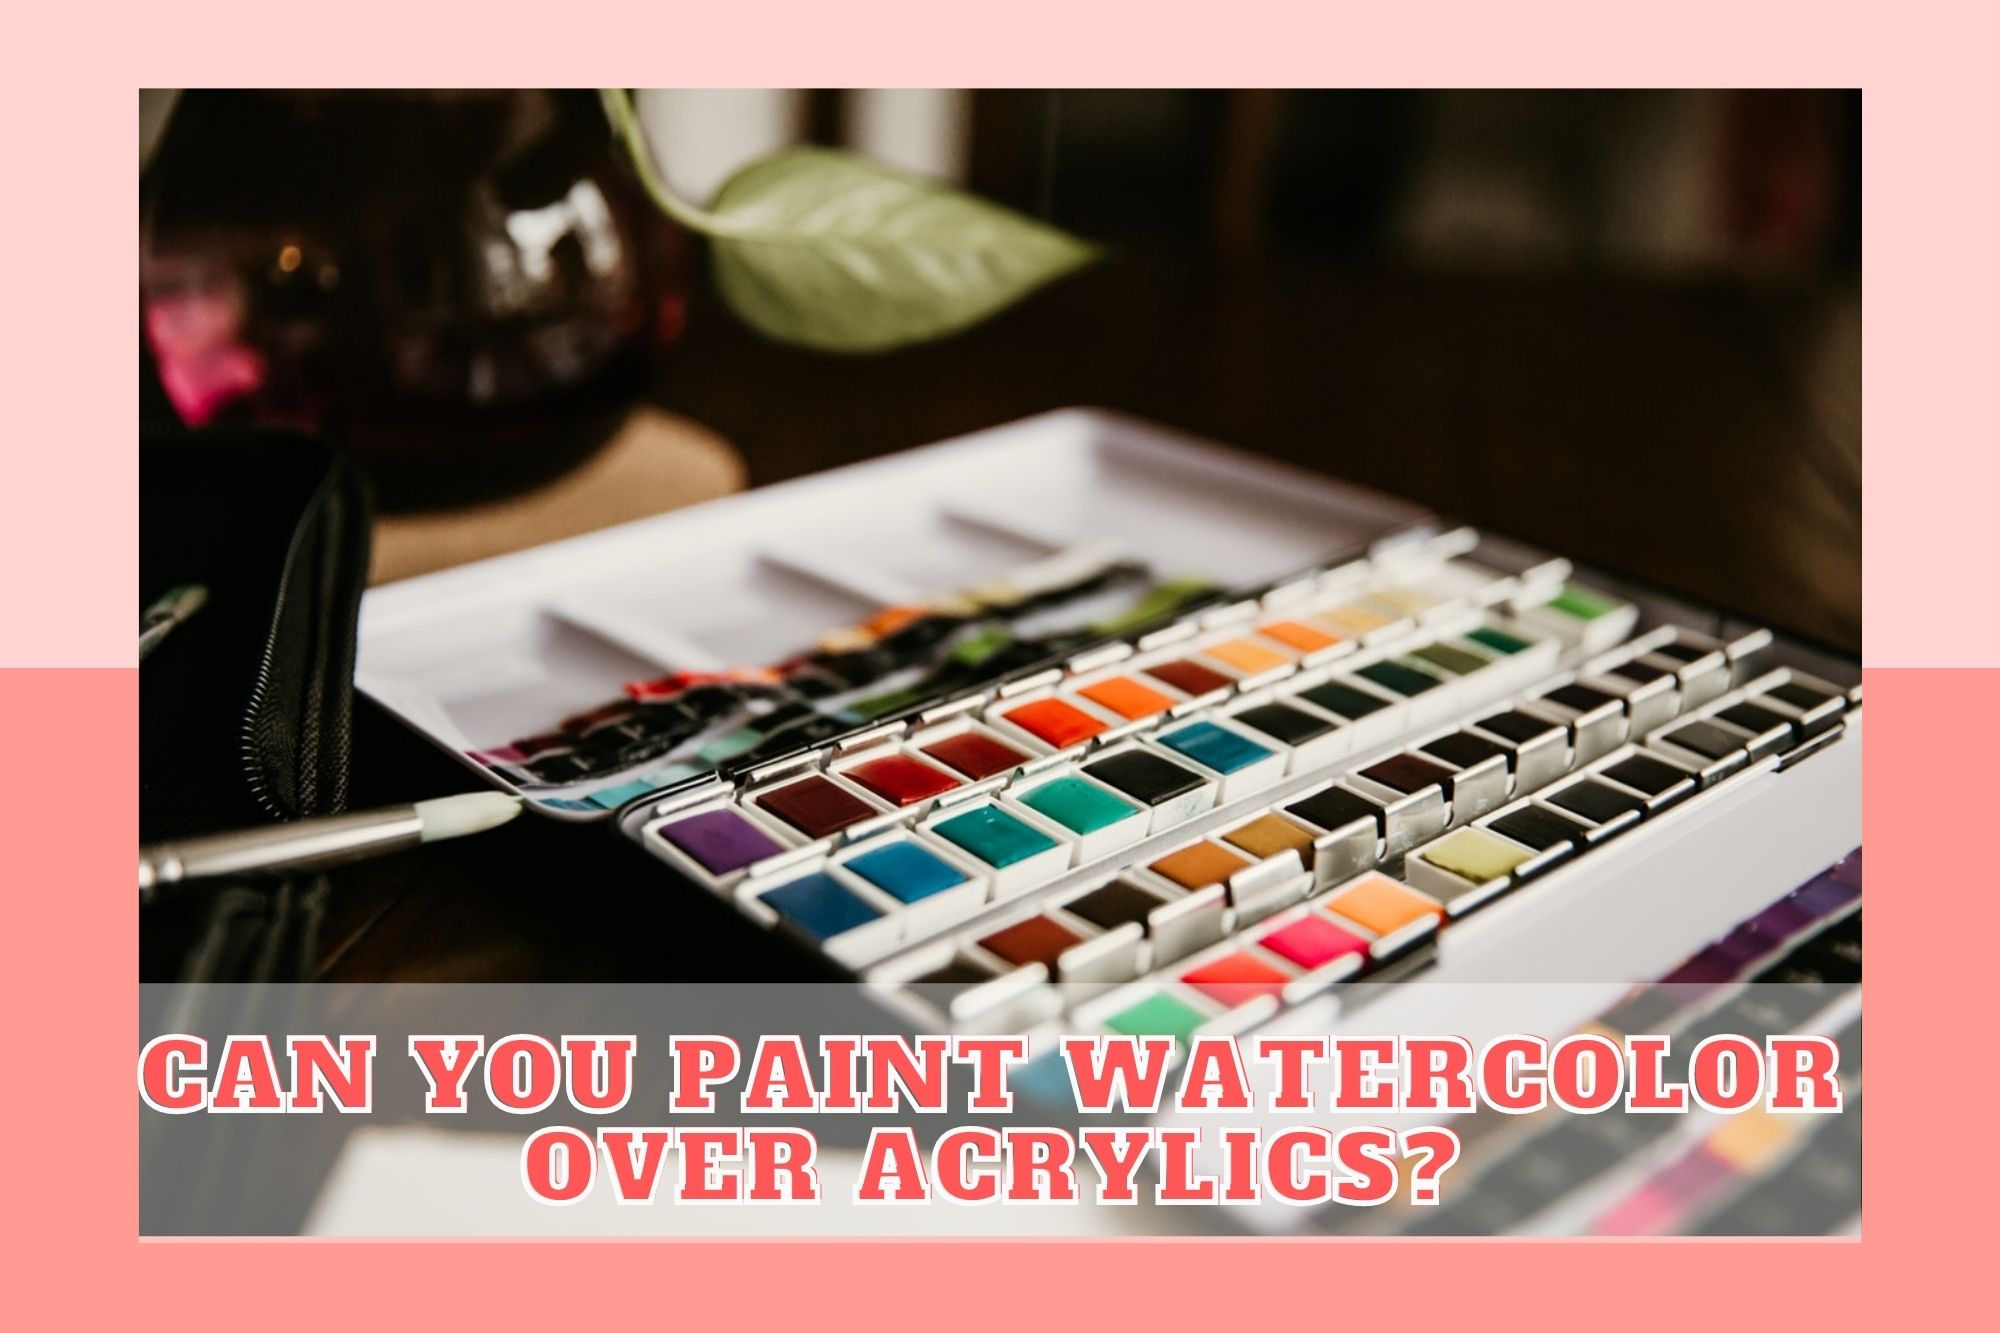 Can You Paint Watercolor Over Acrylics?